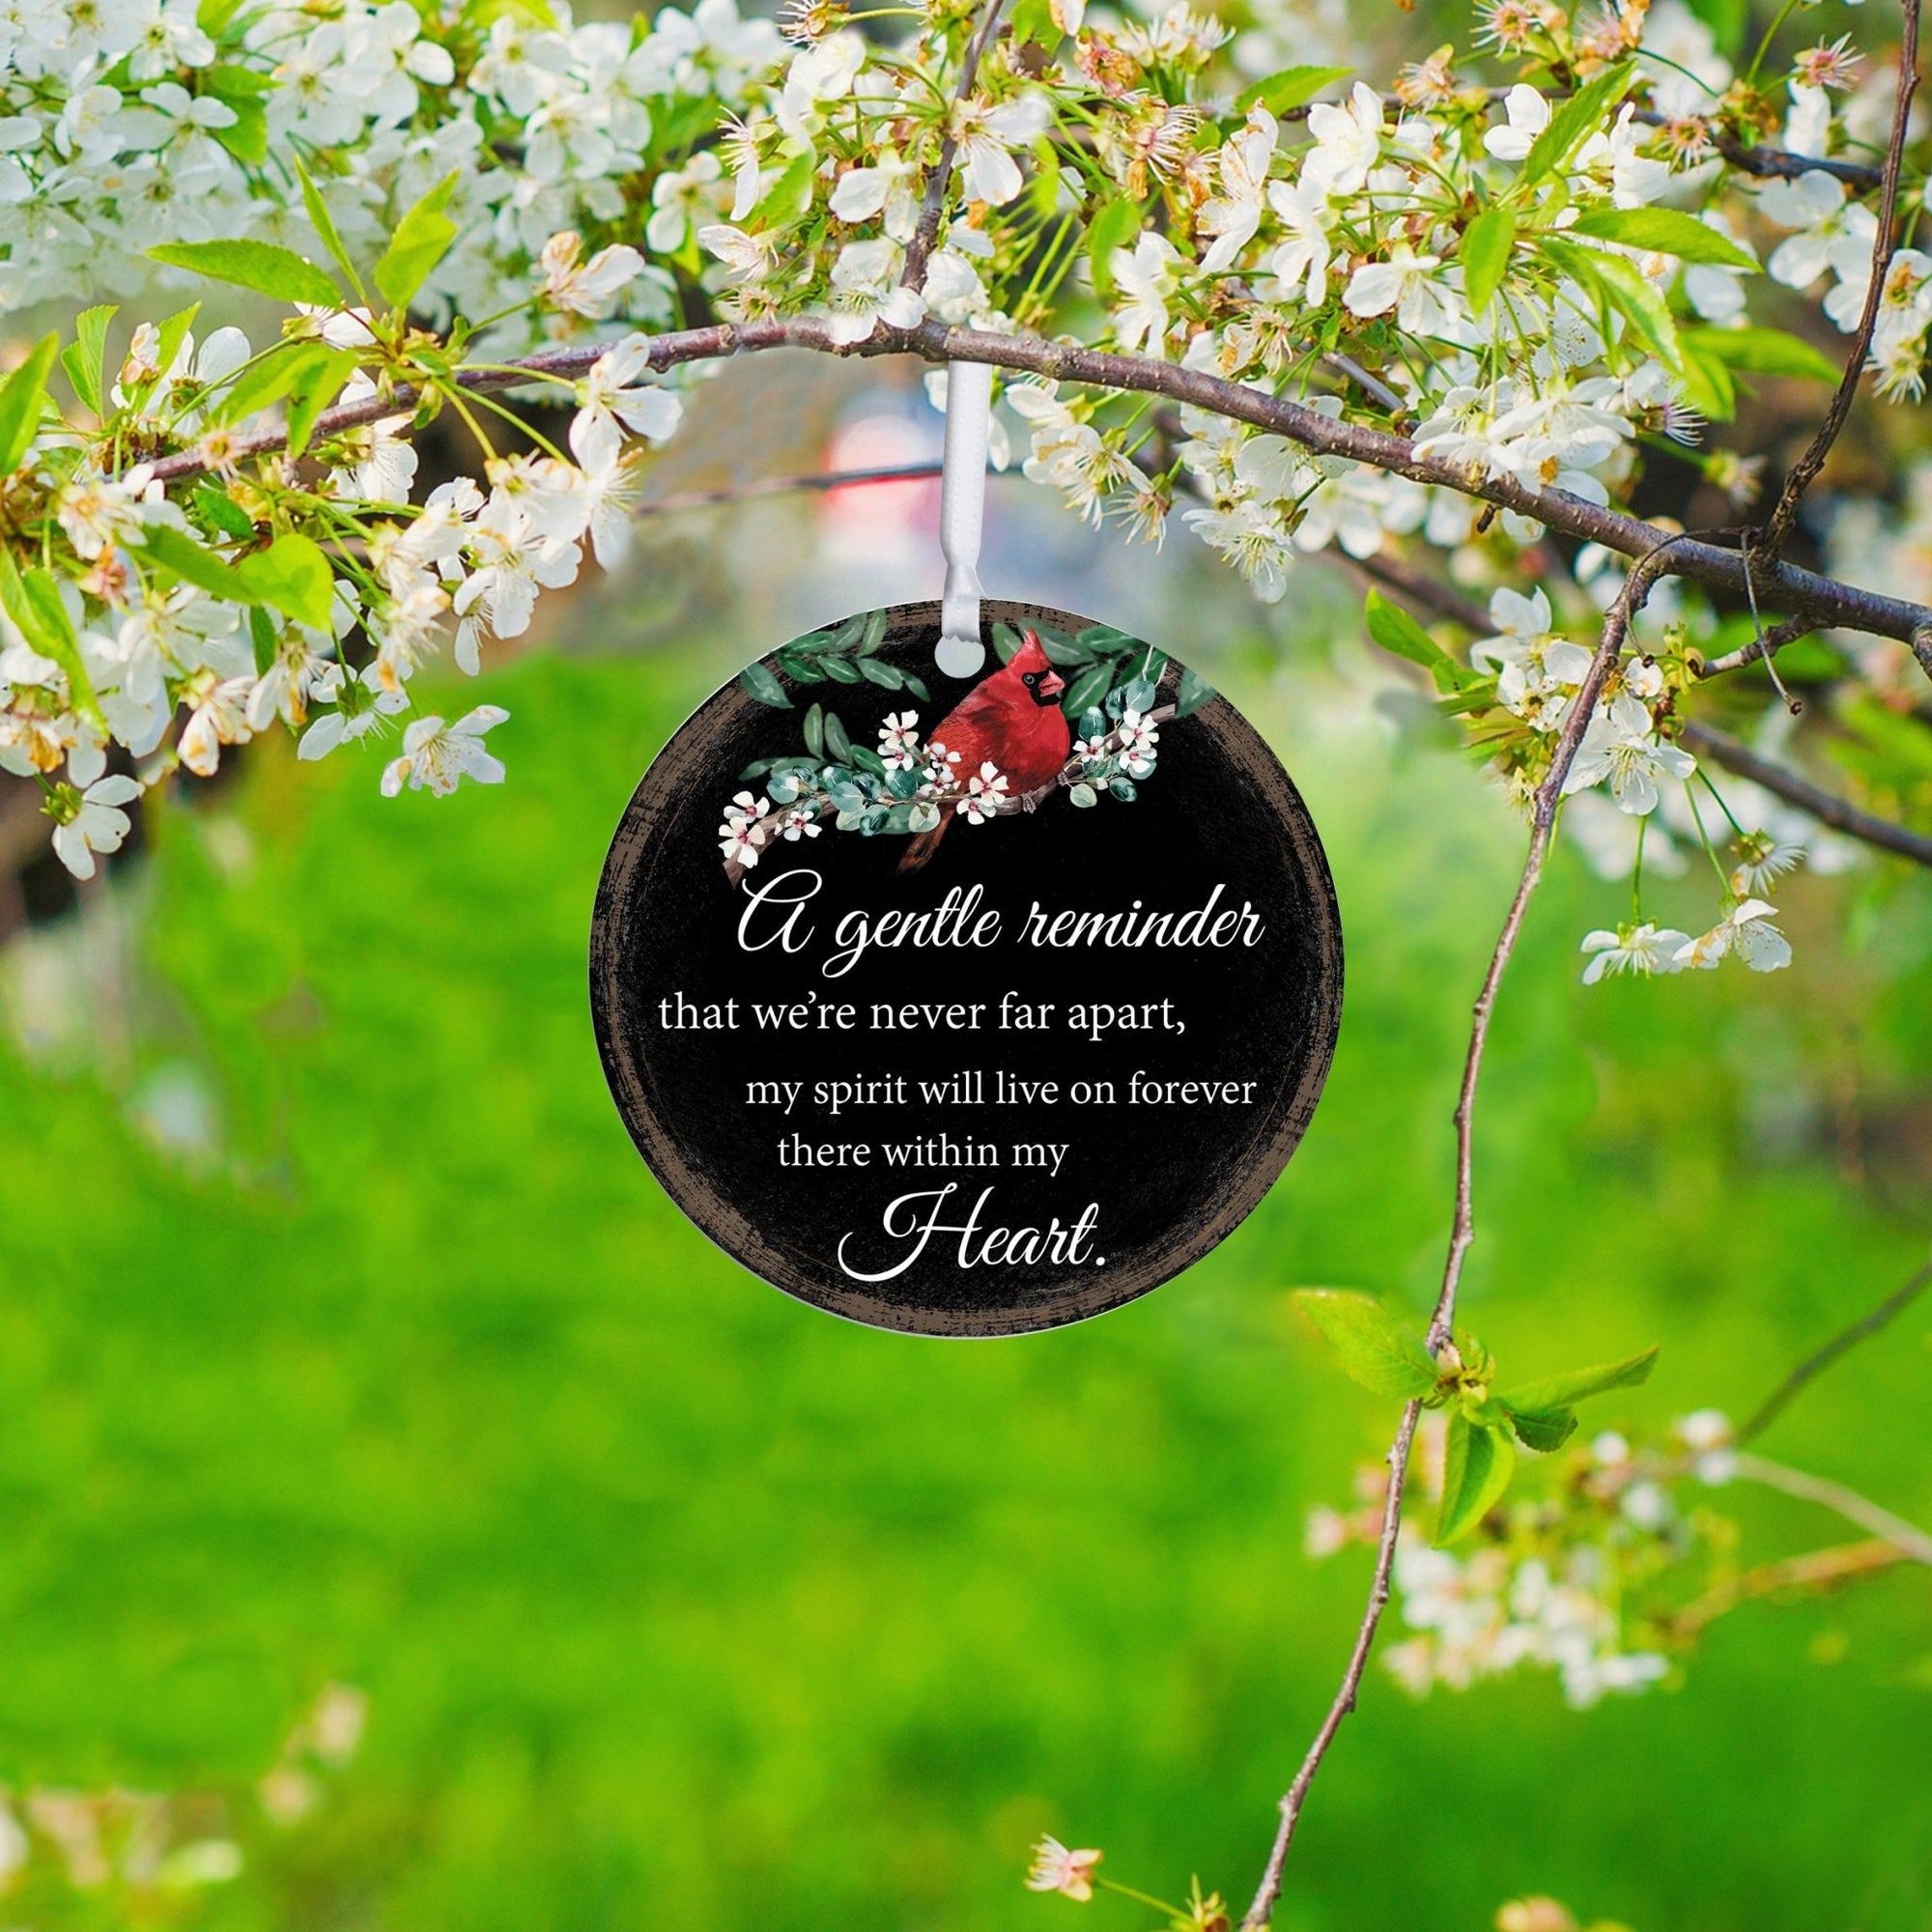 Memorials for loved ones through a unique and meaningful memorial ornament.